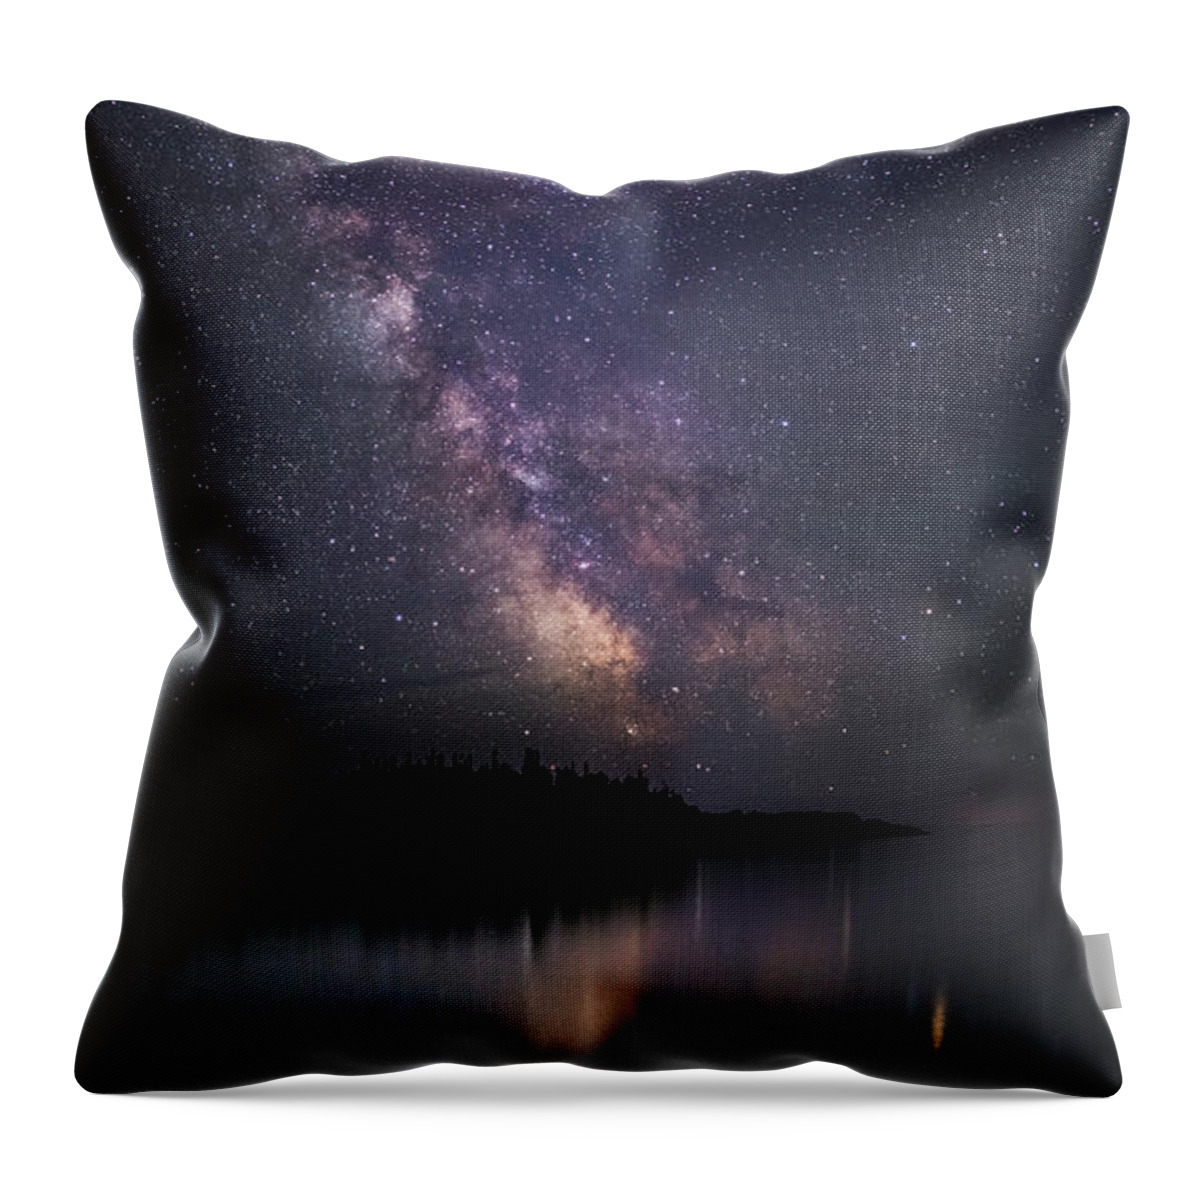 Astrophotography Throw Pillow featuring the photograph Horseshoe Beach Milky Way Pano by Jakub Sisak